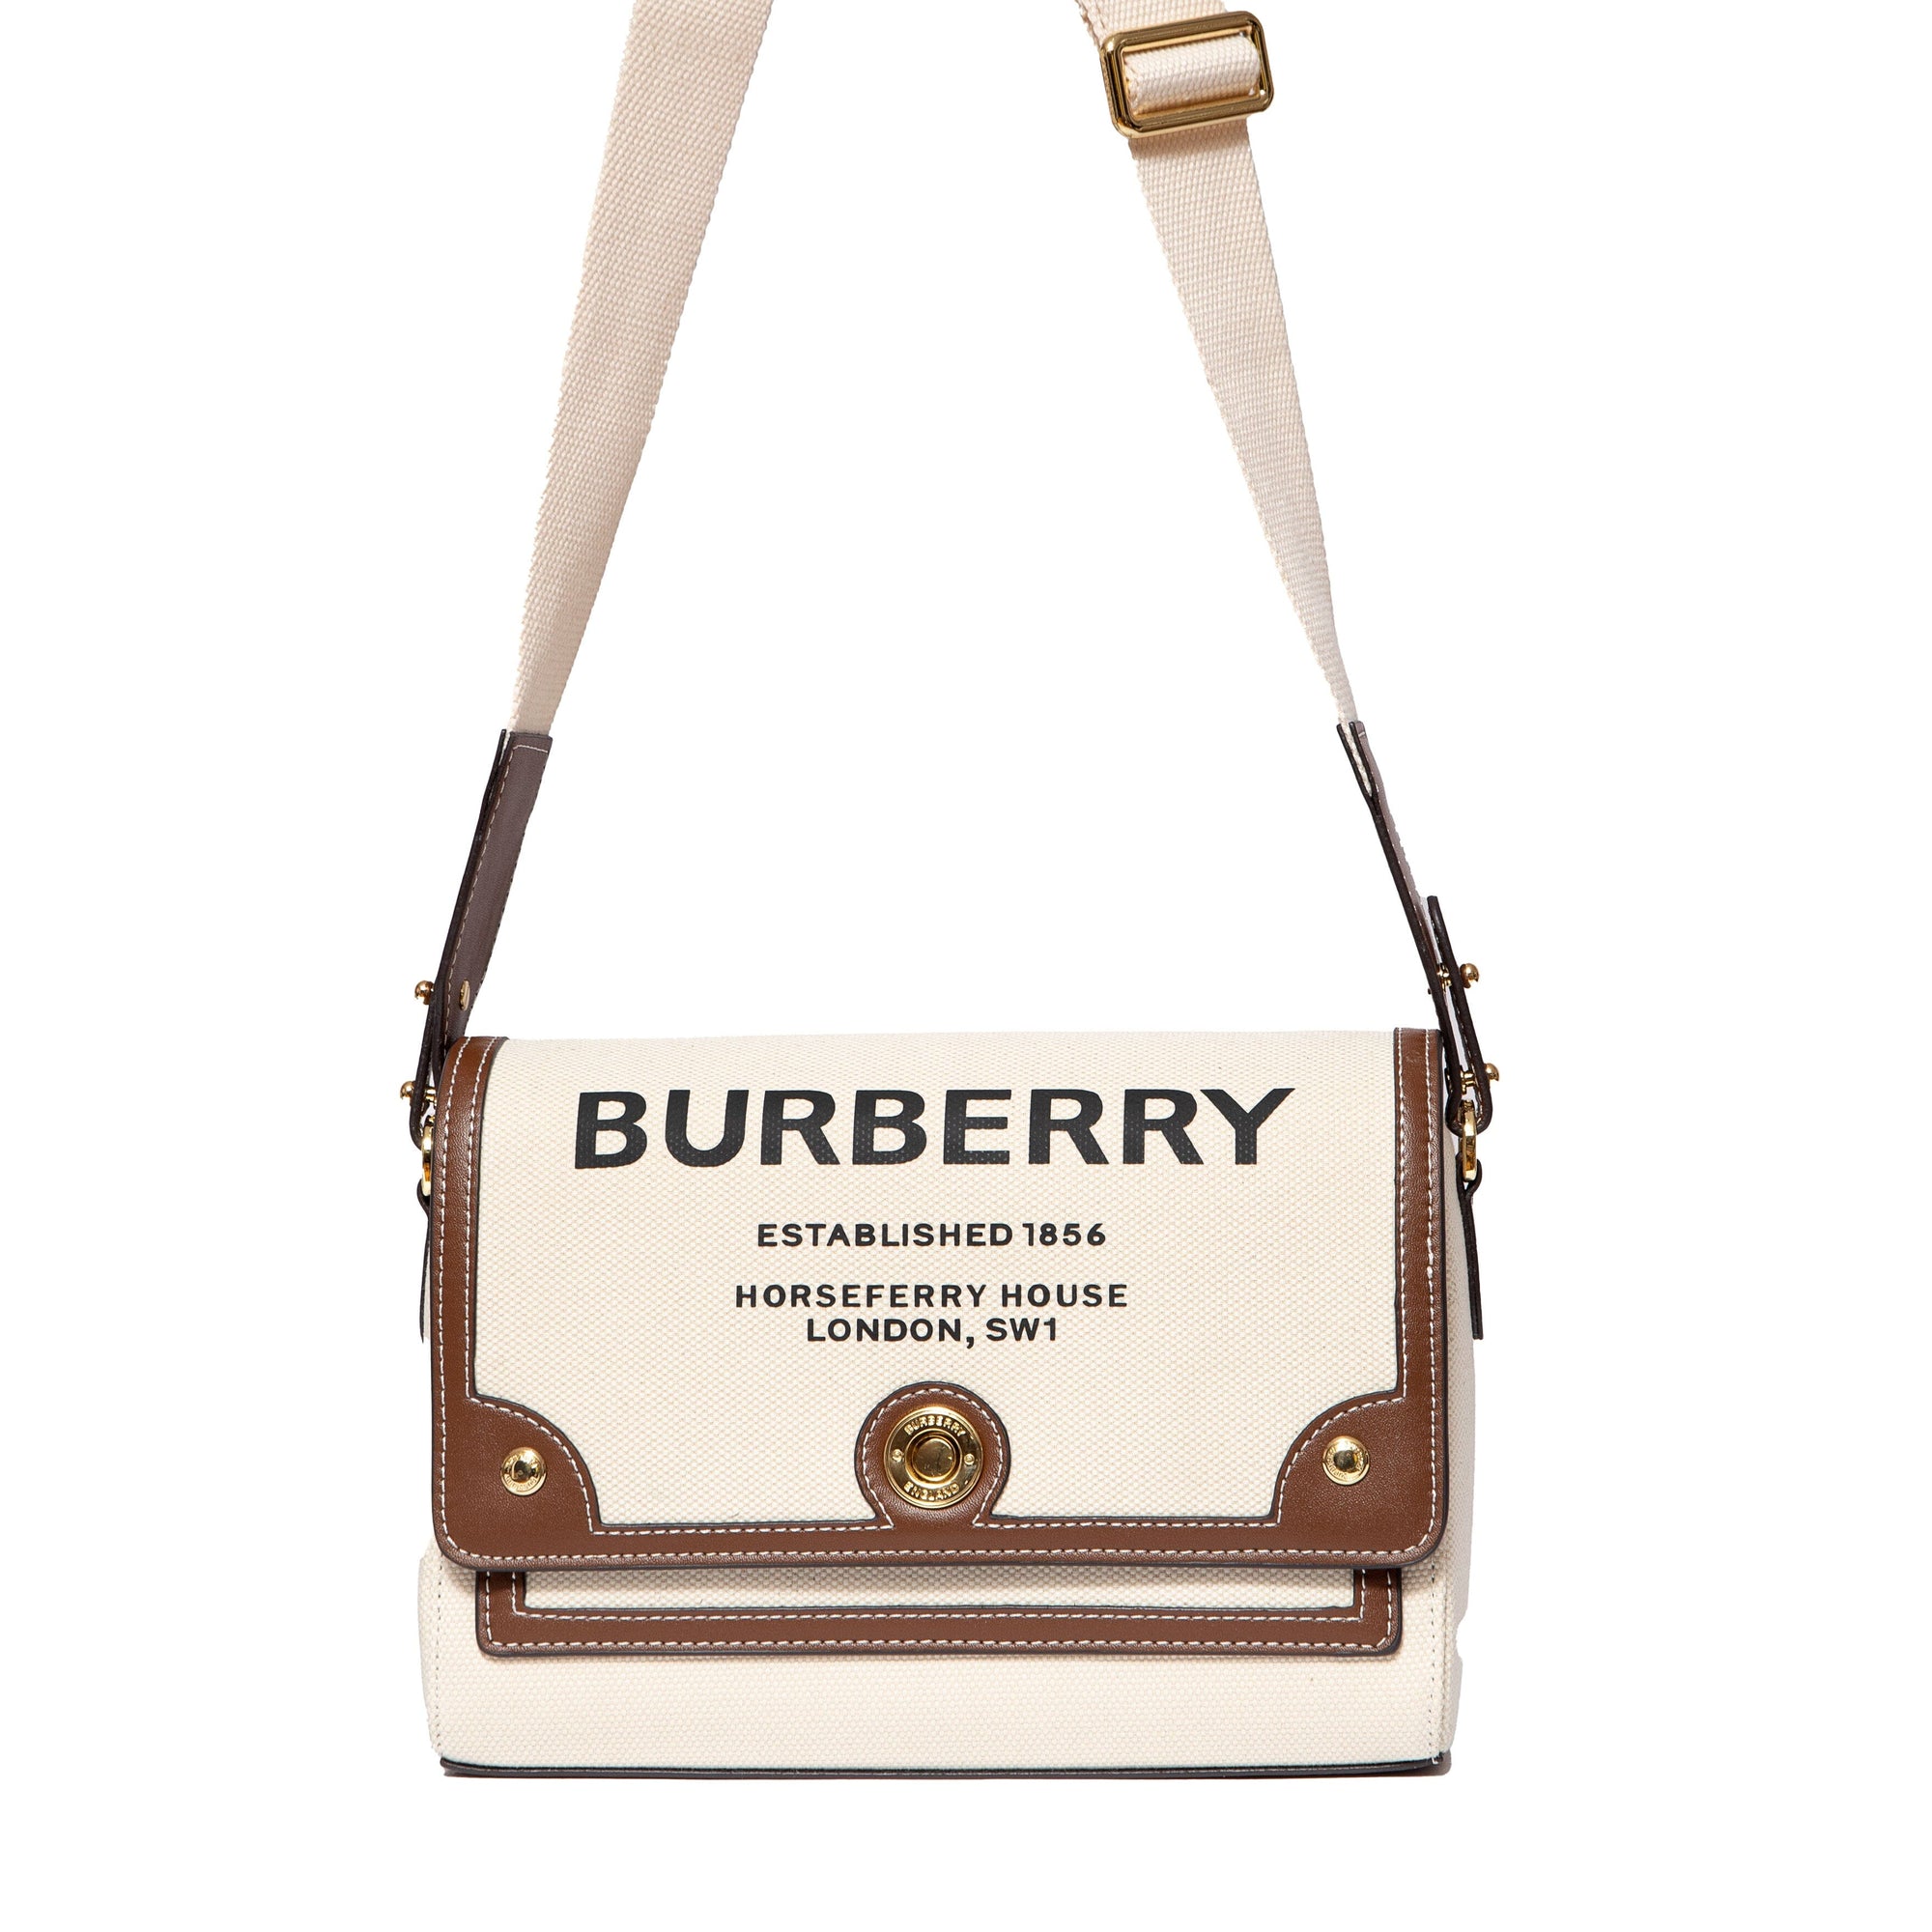 Burberry bags for sale in Cairo, Egypt